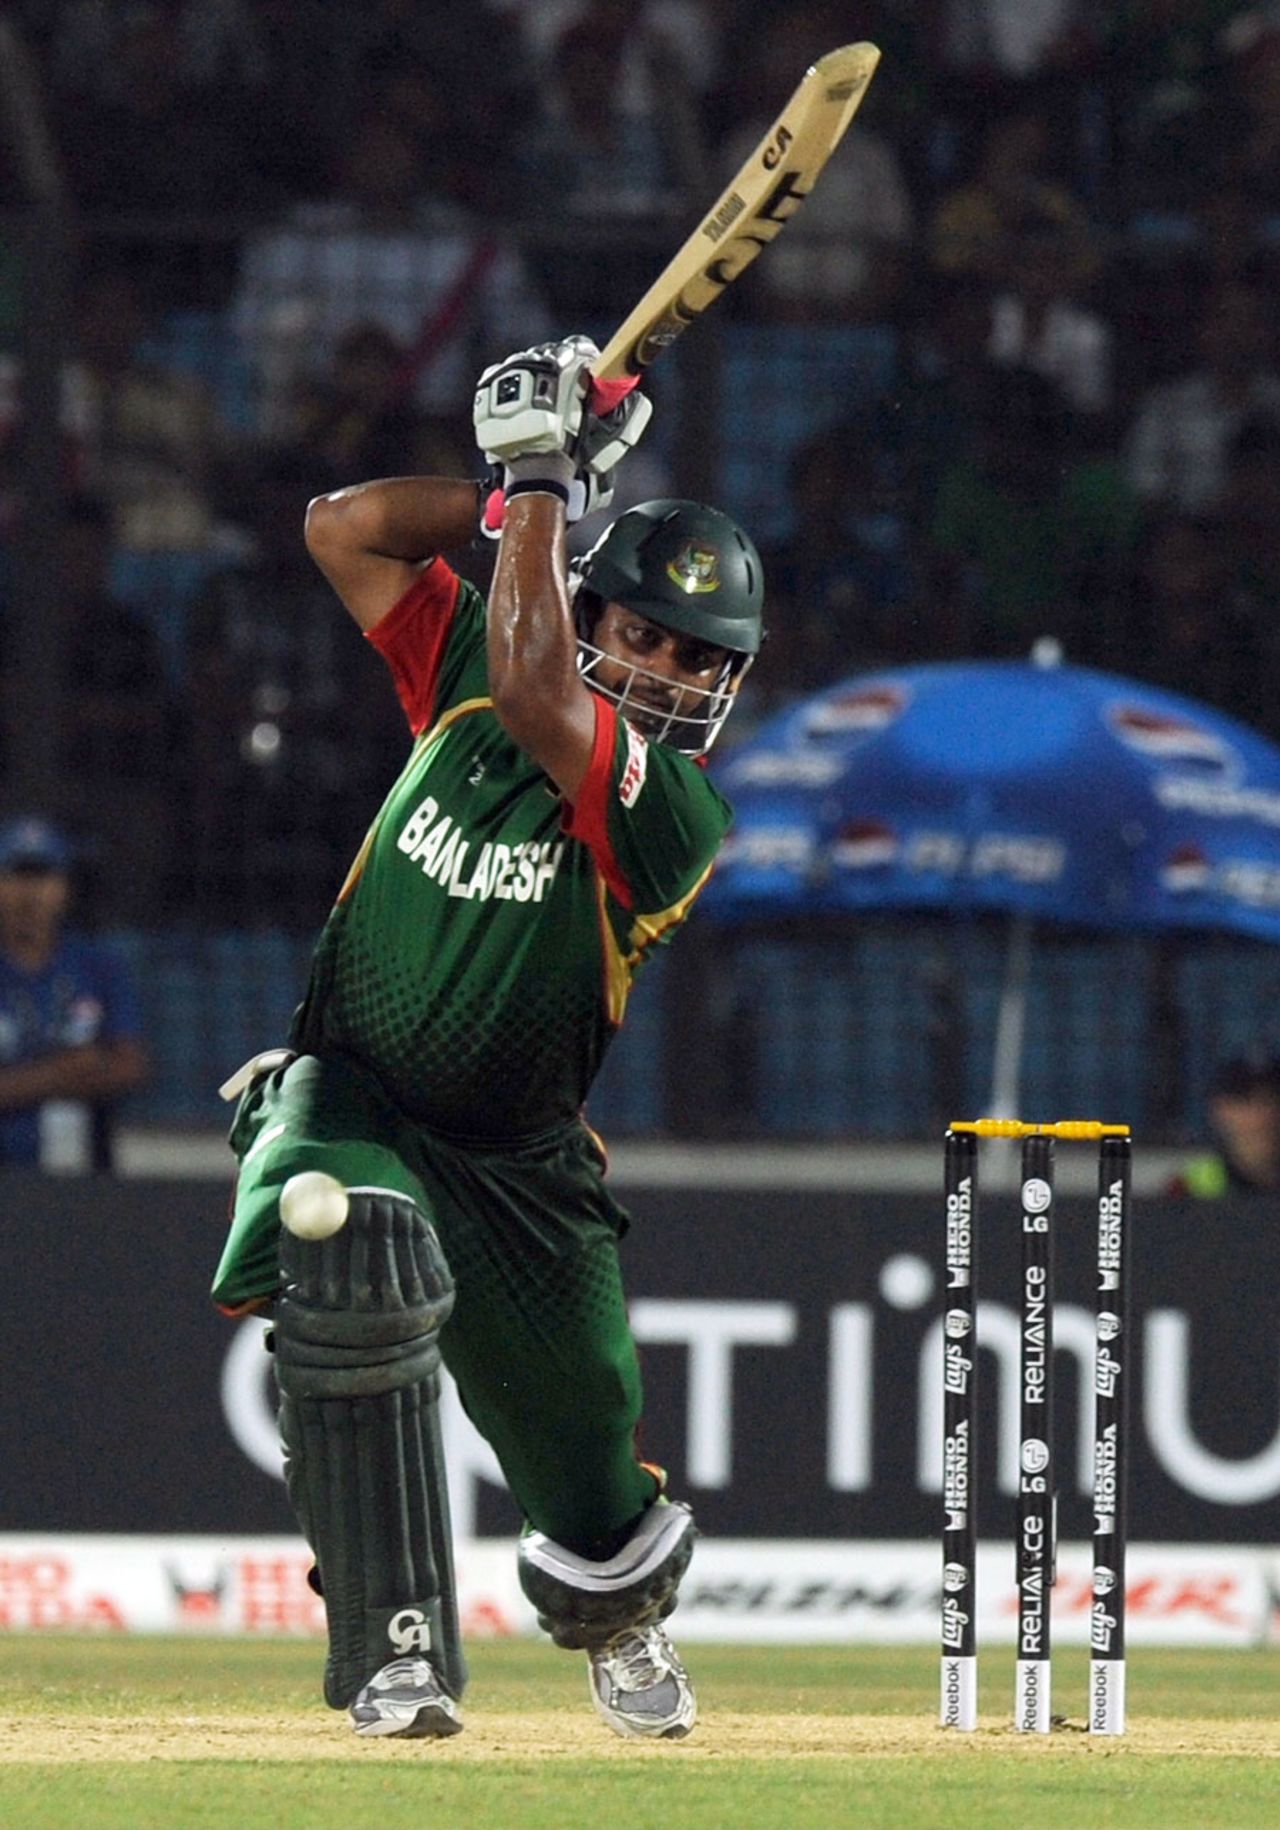 Tamim Iqbal looked in prime form during his 38 from 26 balls, Bangladesh v England, Group B, World Cup, Chittagong, March 11, 2011